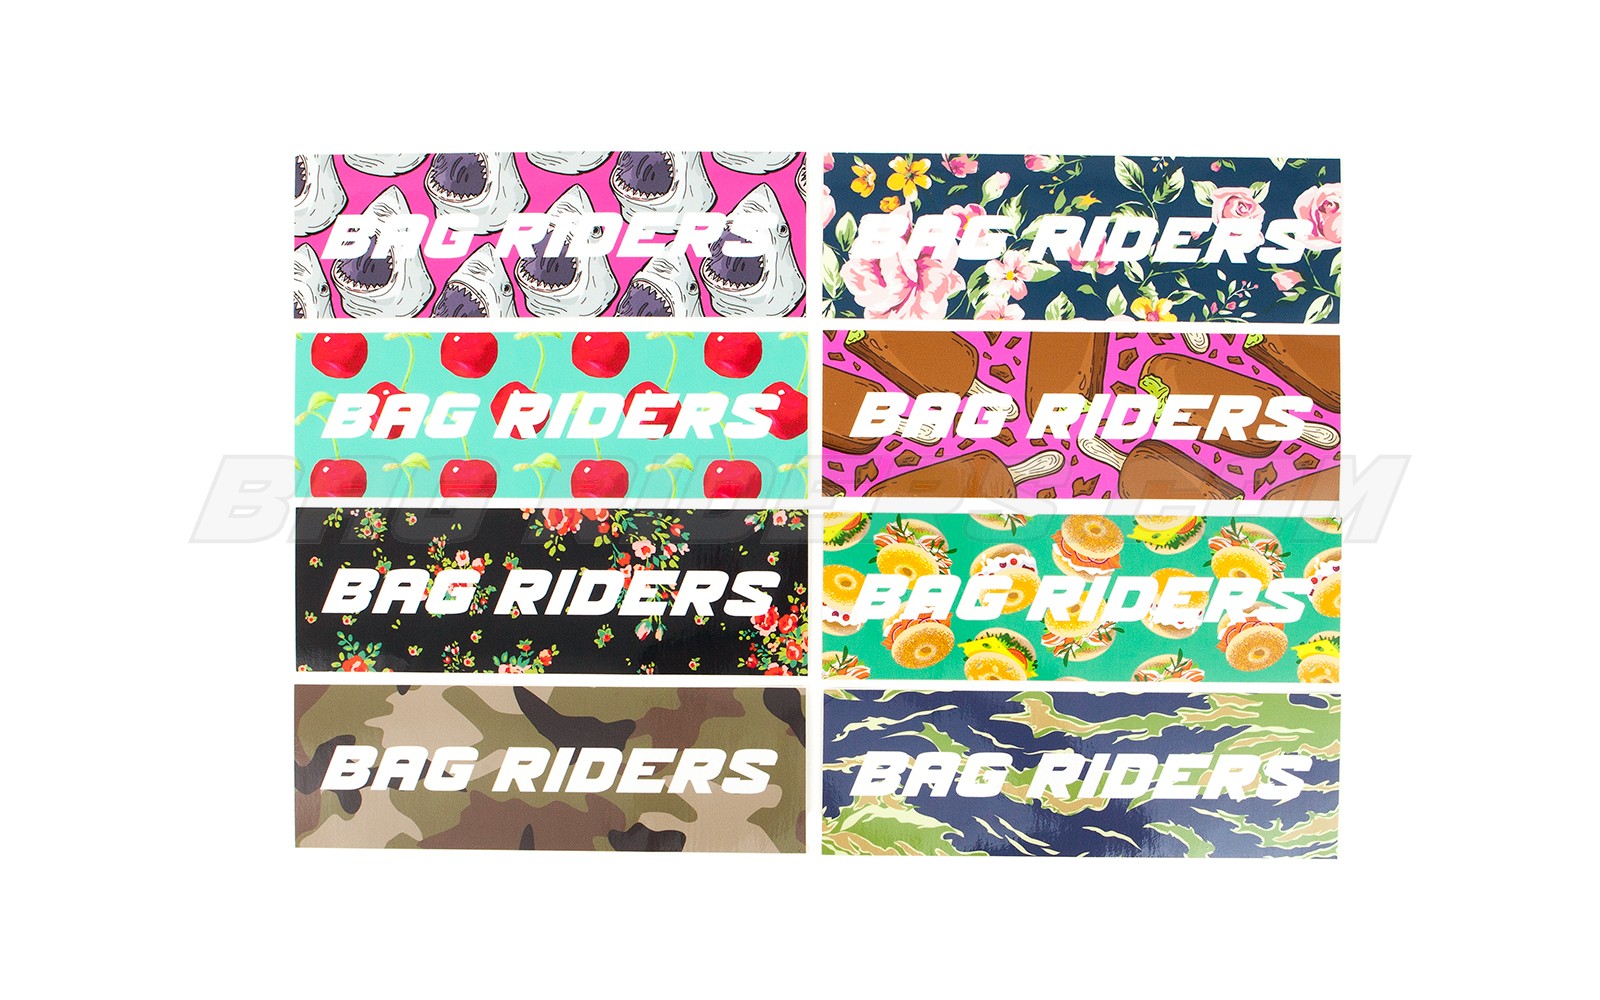 Bag Riders Stickers